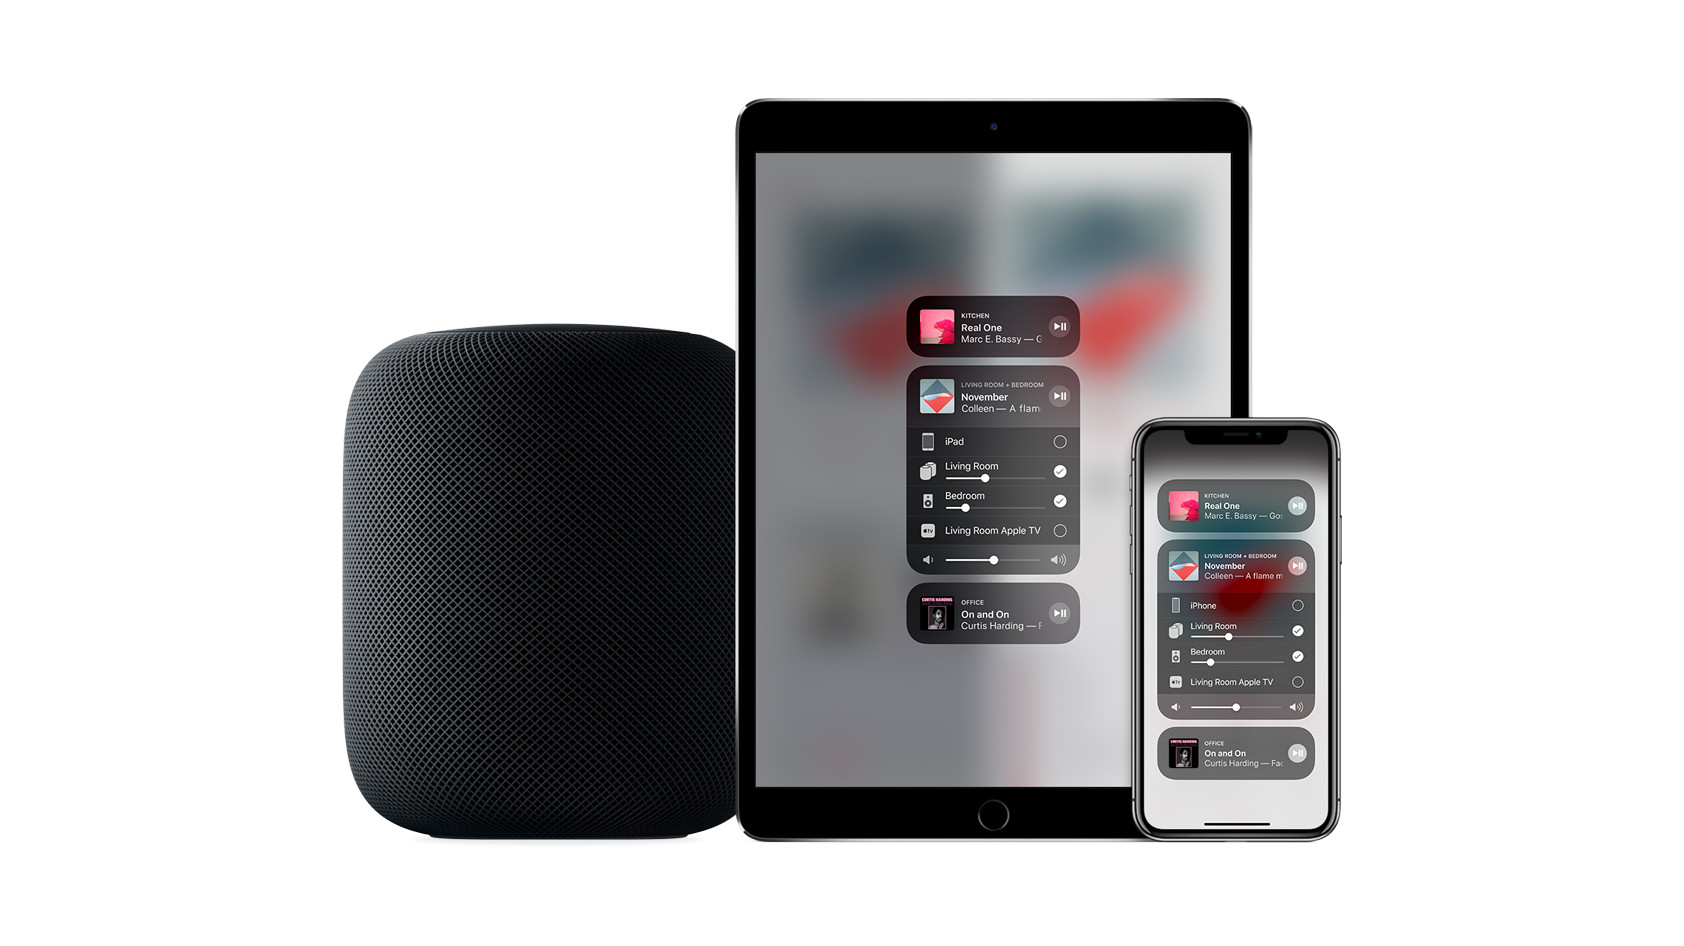 This is an image of an iPad and iPhone displaying AirPlay controls alongside the HomePod.